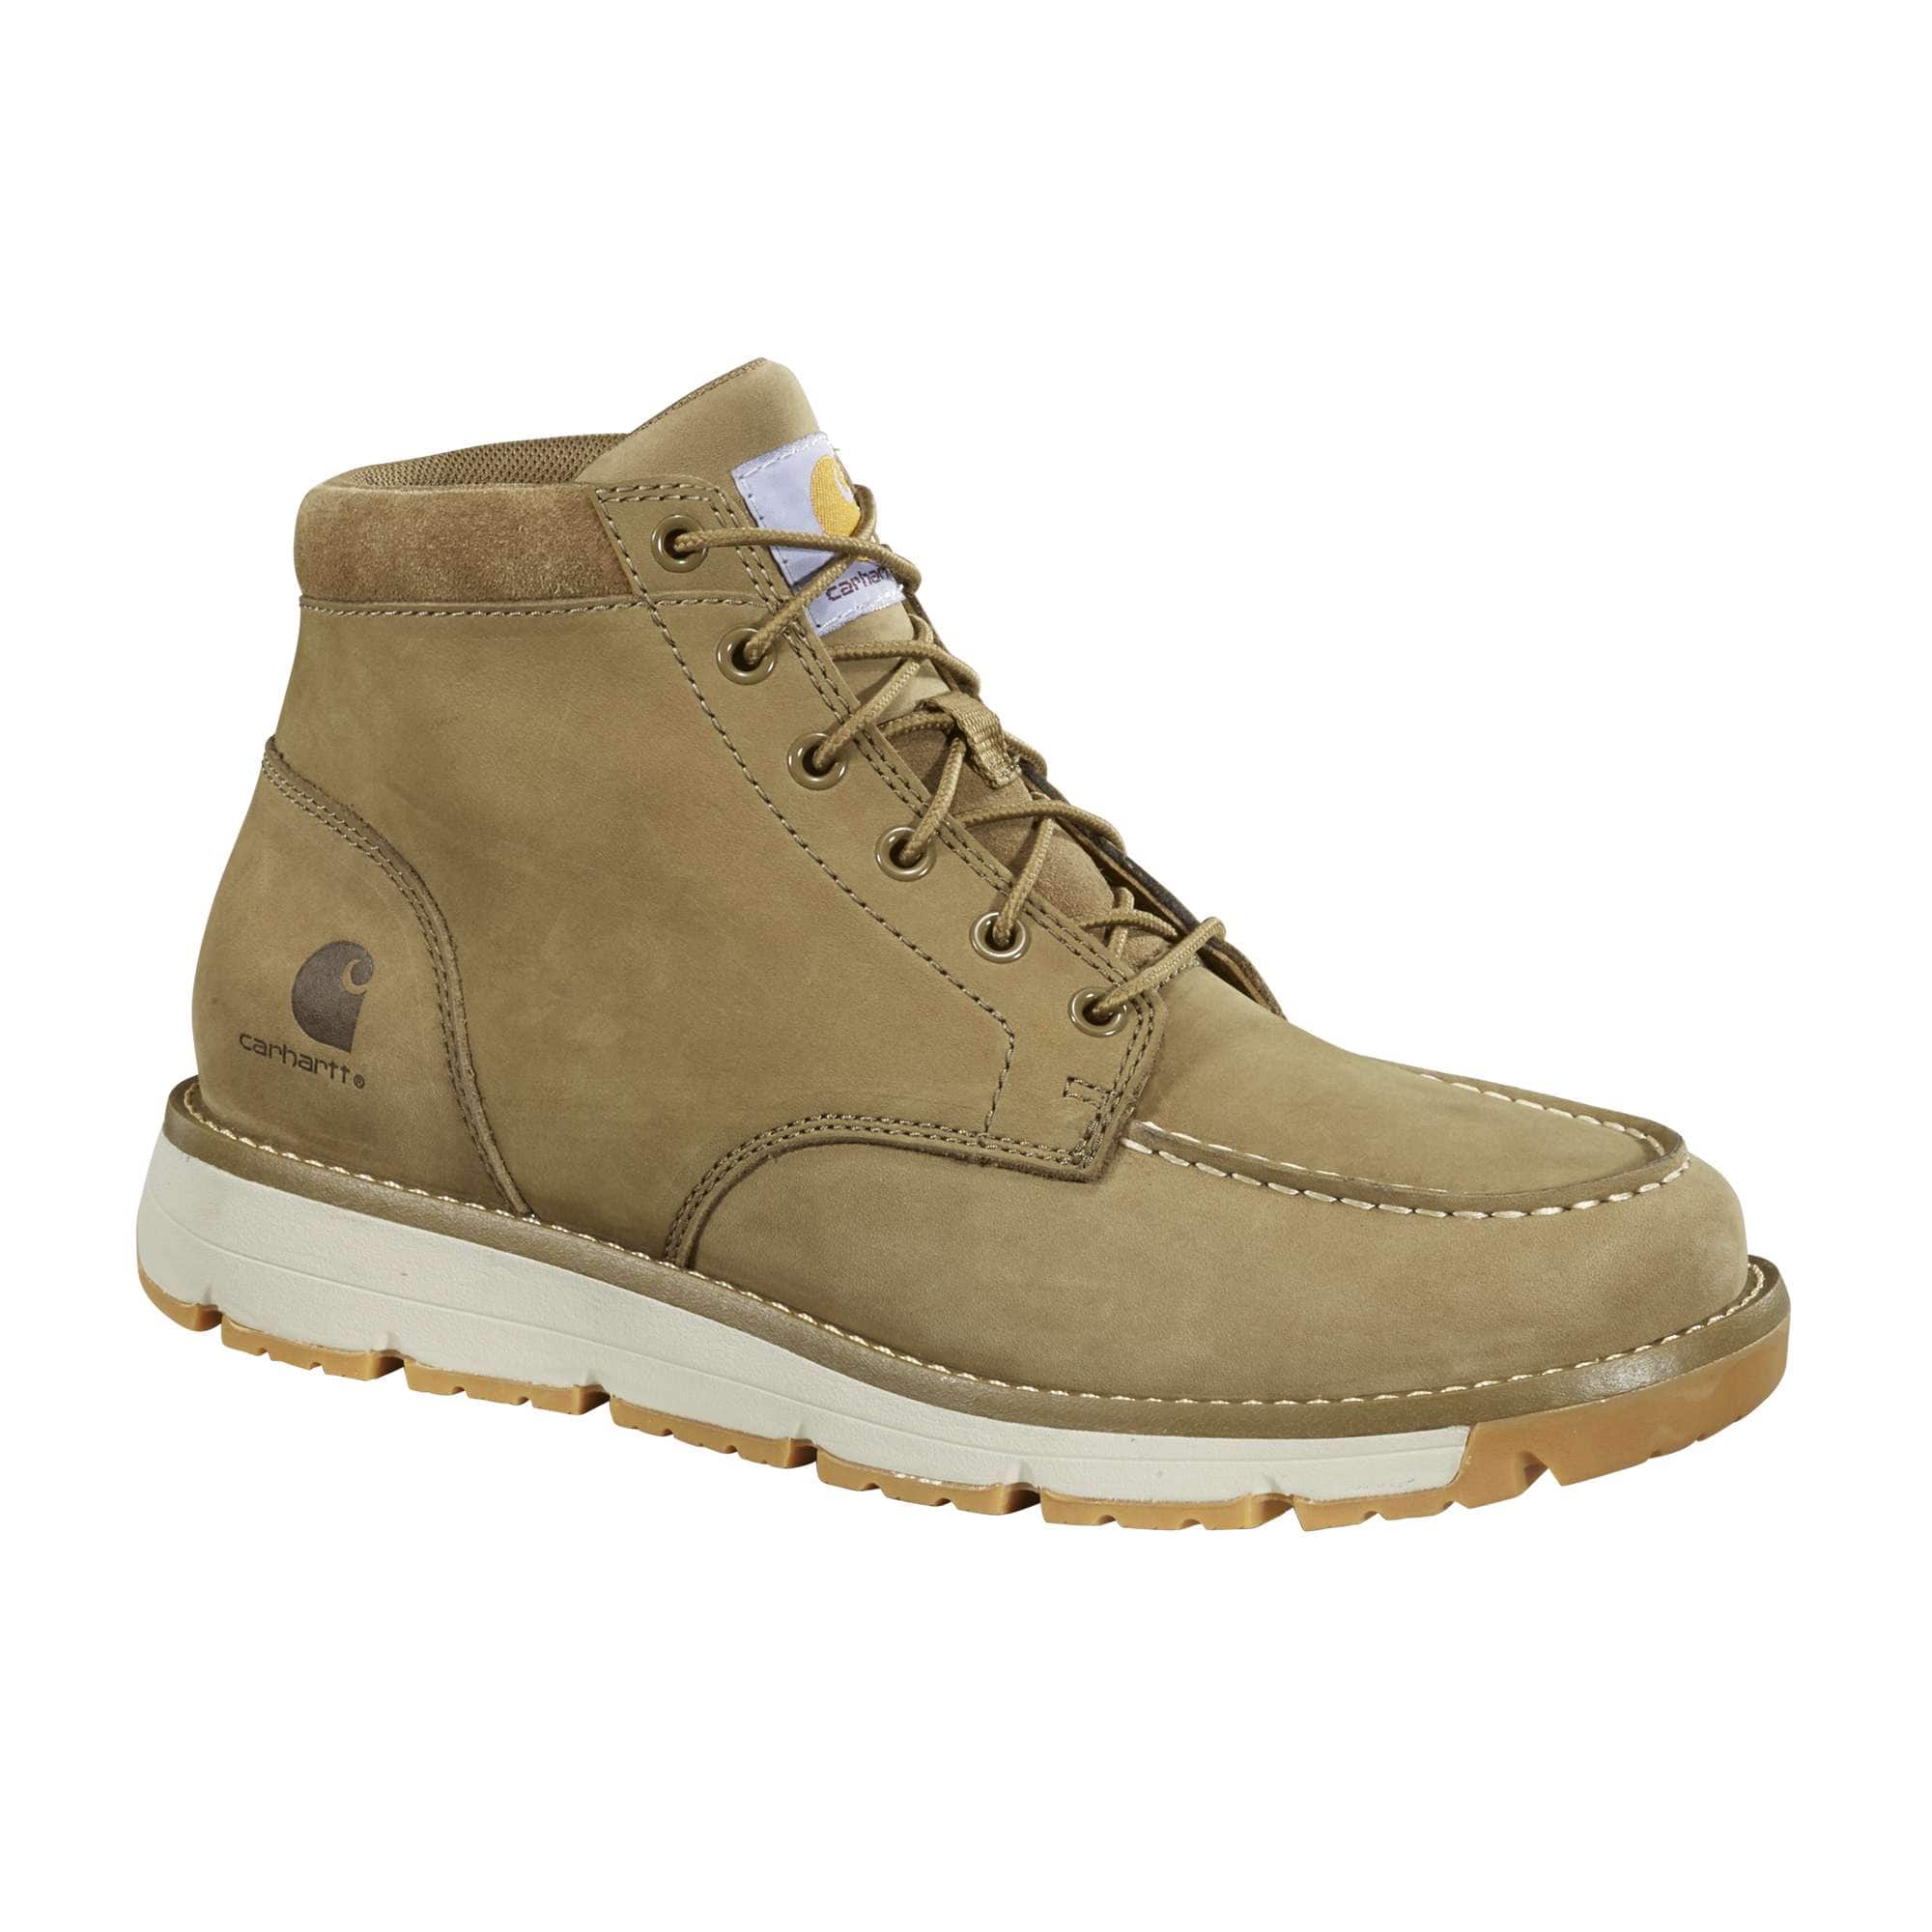 Mens Wedge Boots - Work & Outdoor Leather Wedge Boots for Men | Carhartt